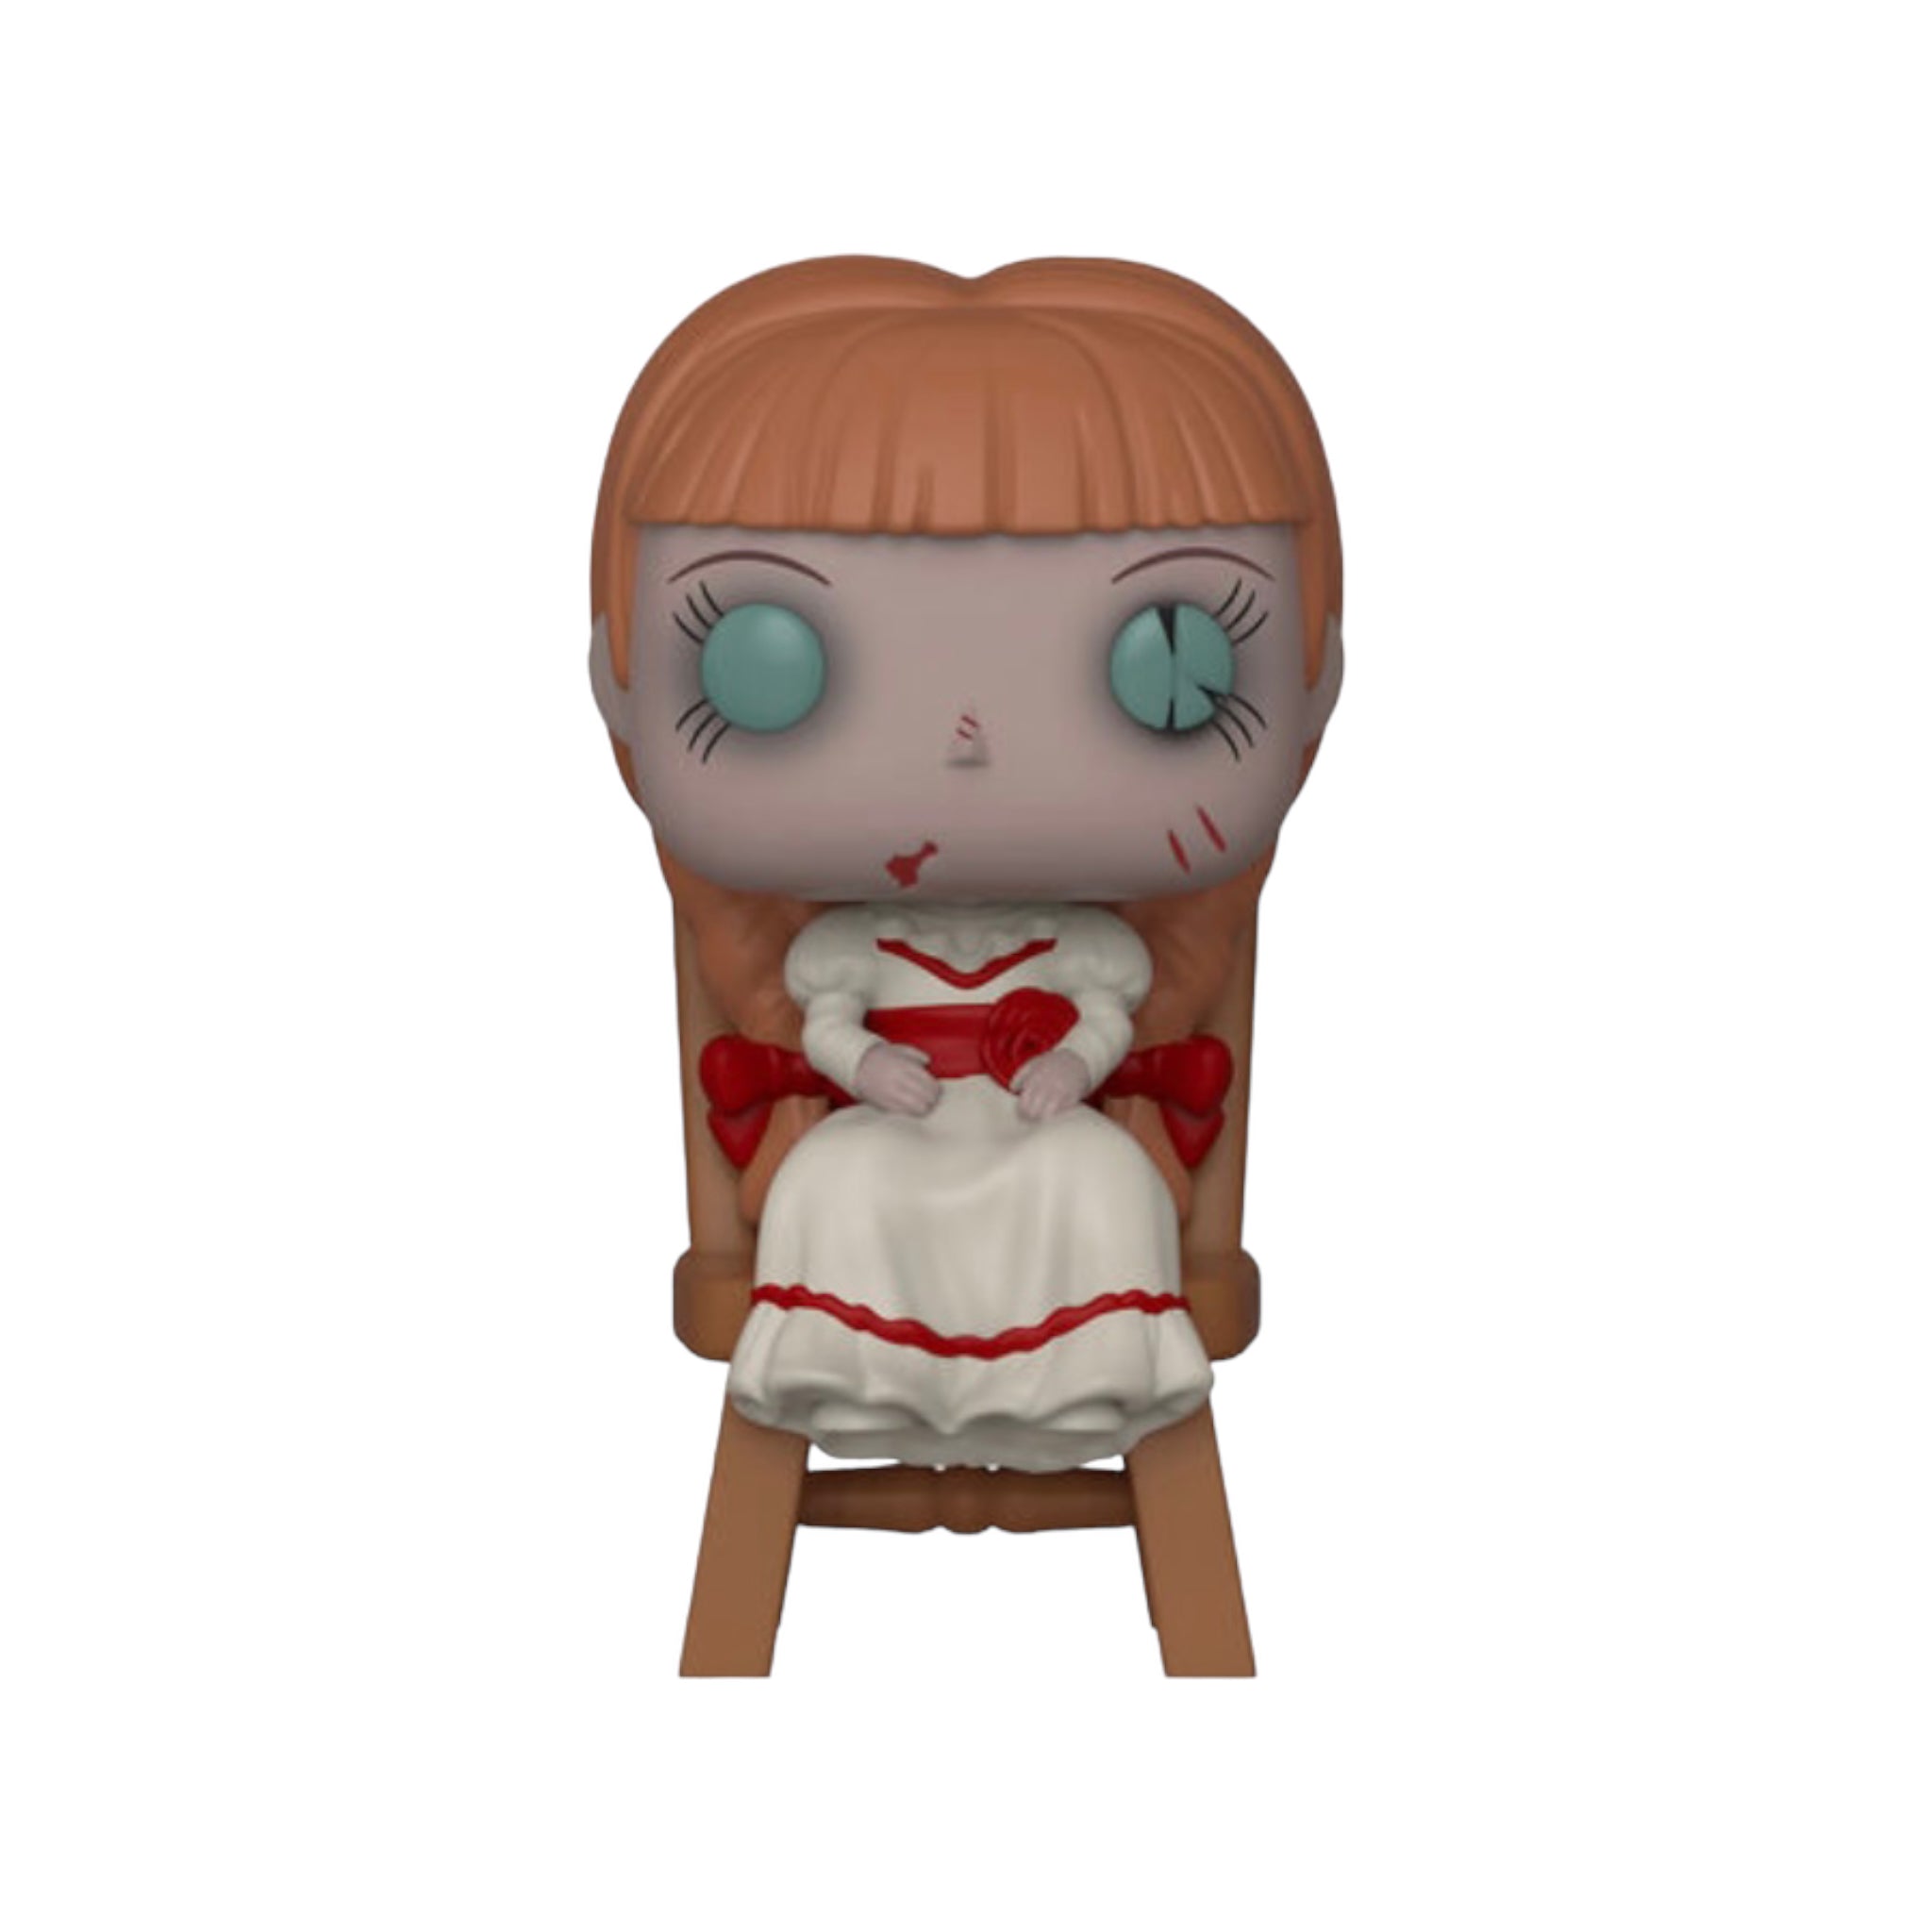 Annabelle #790 (In Chair) Funko Pop! - Annabelle Comes Home